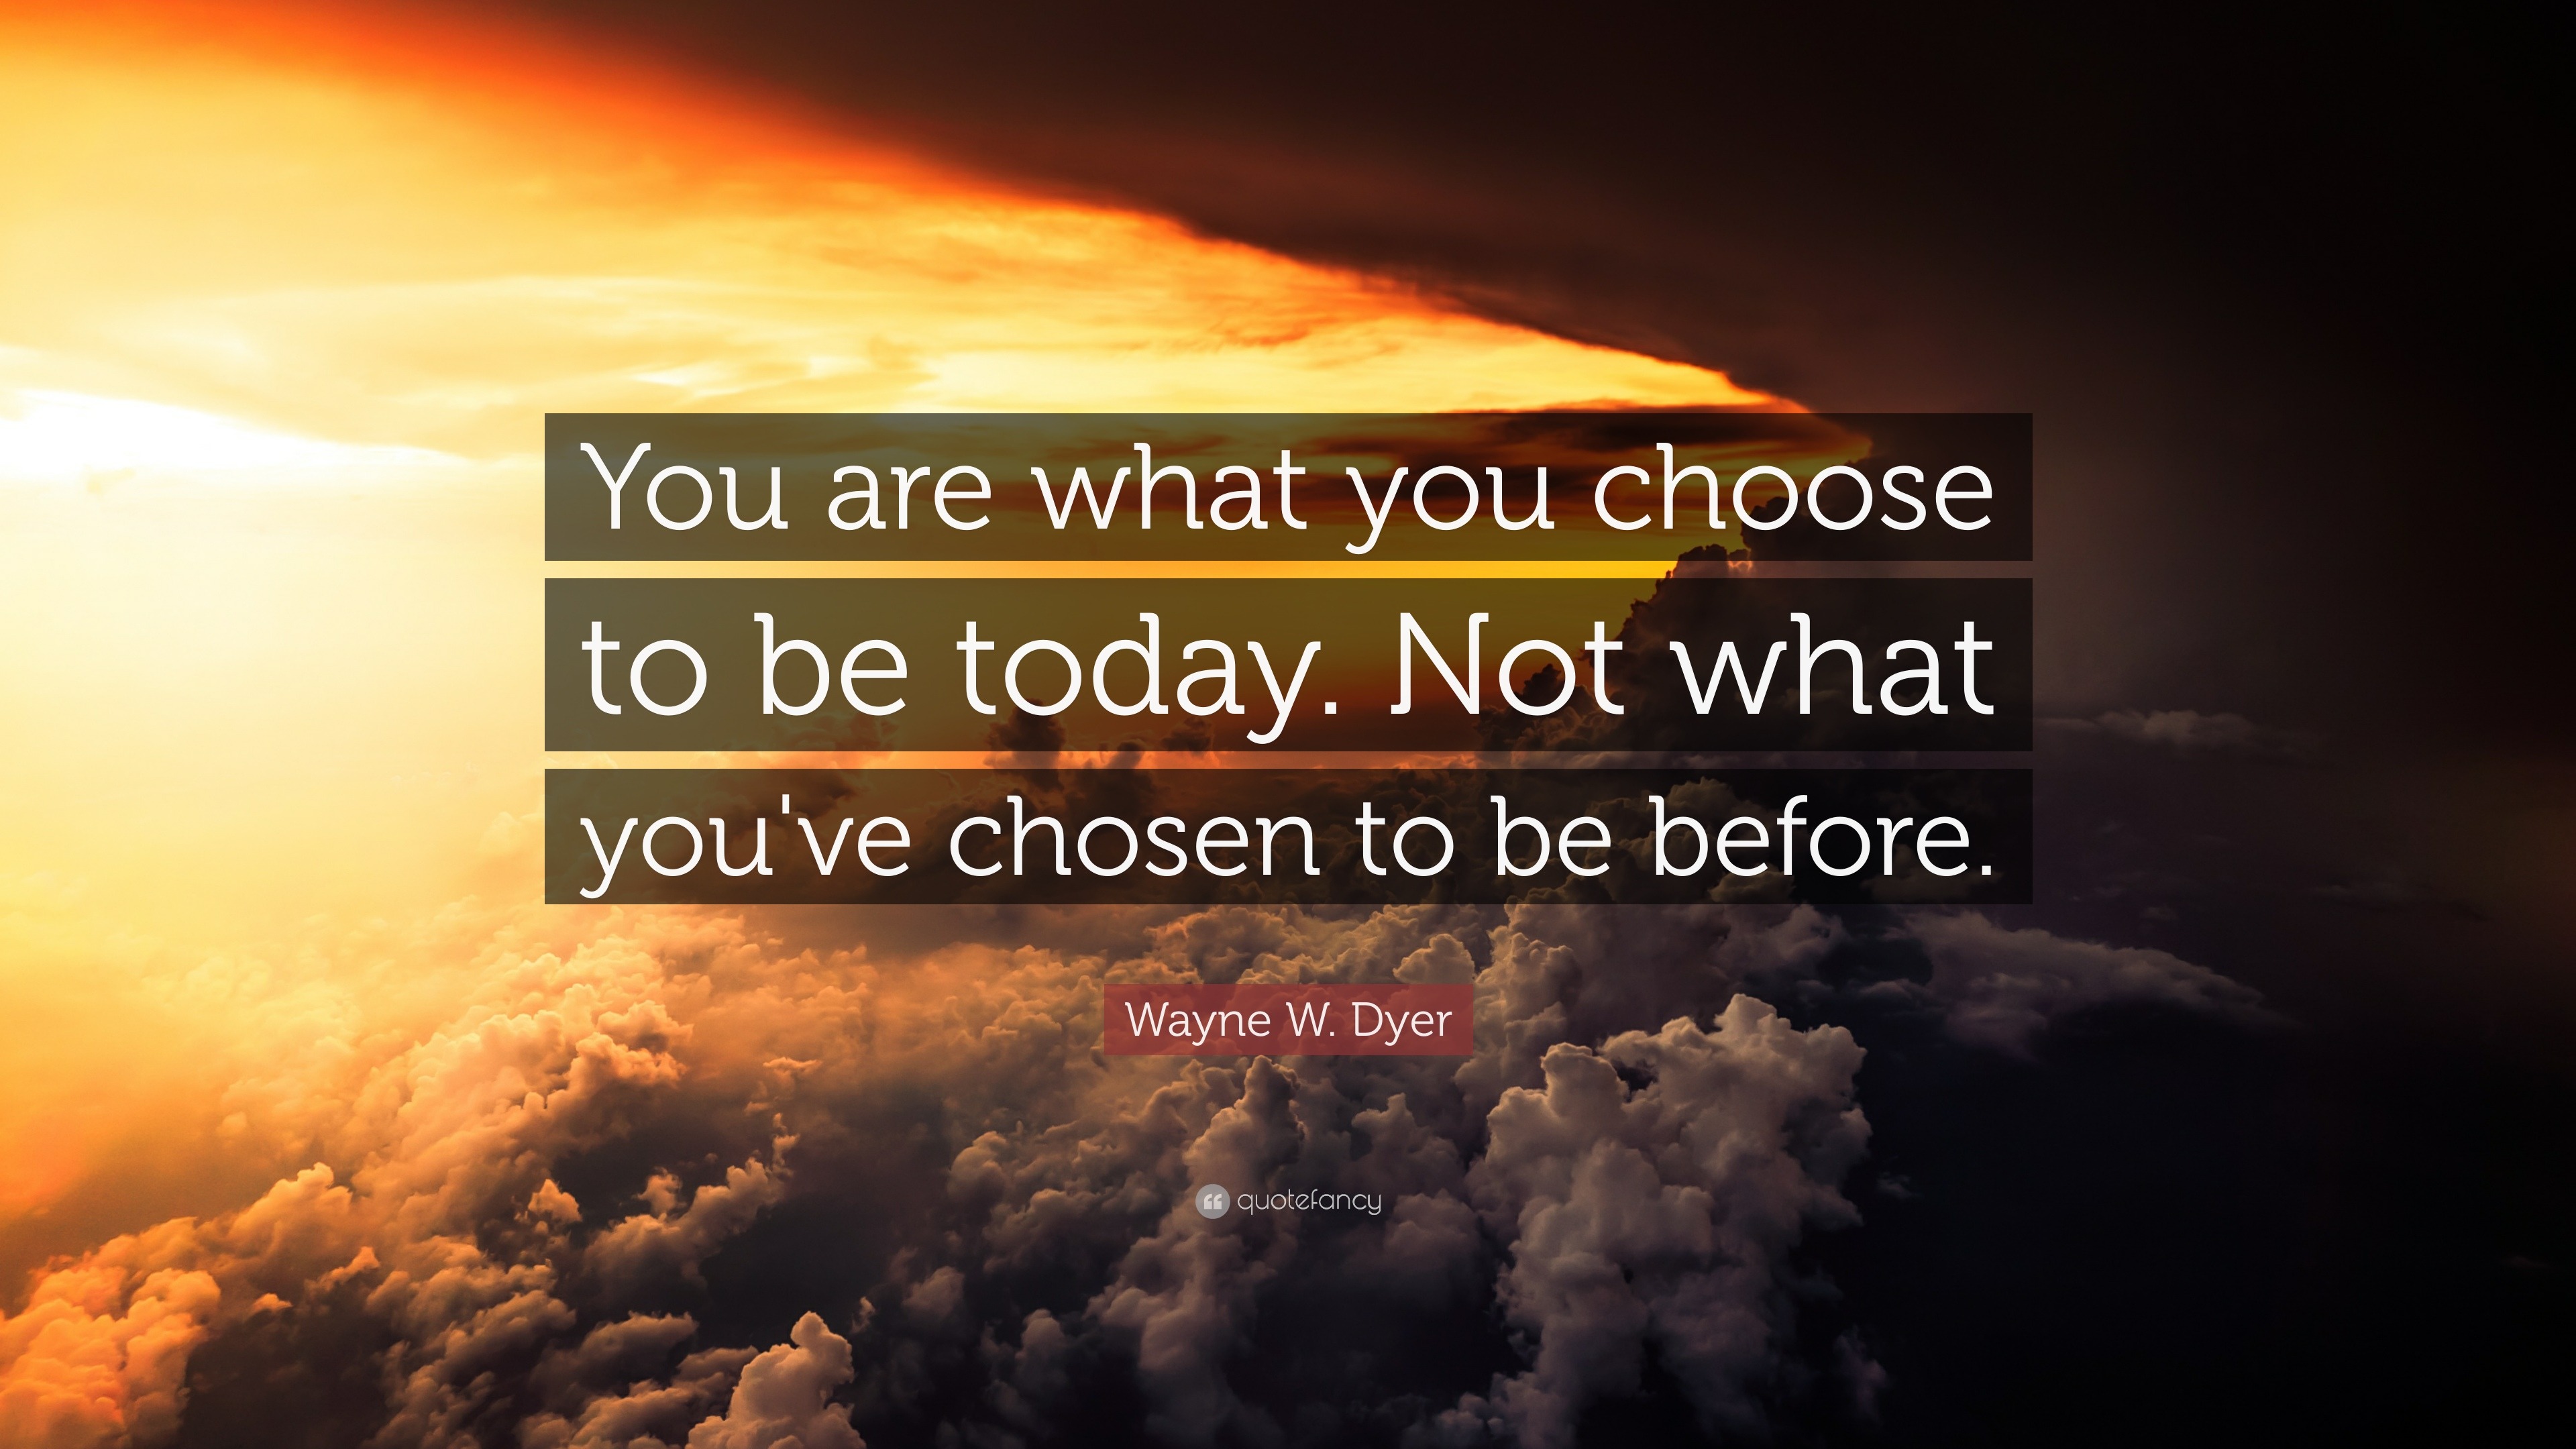 Wayne W. Dyer Quote: “You are what you choose to be today. Not what you